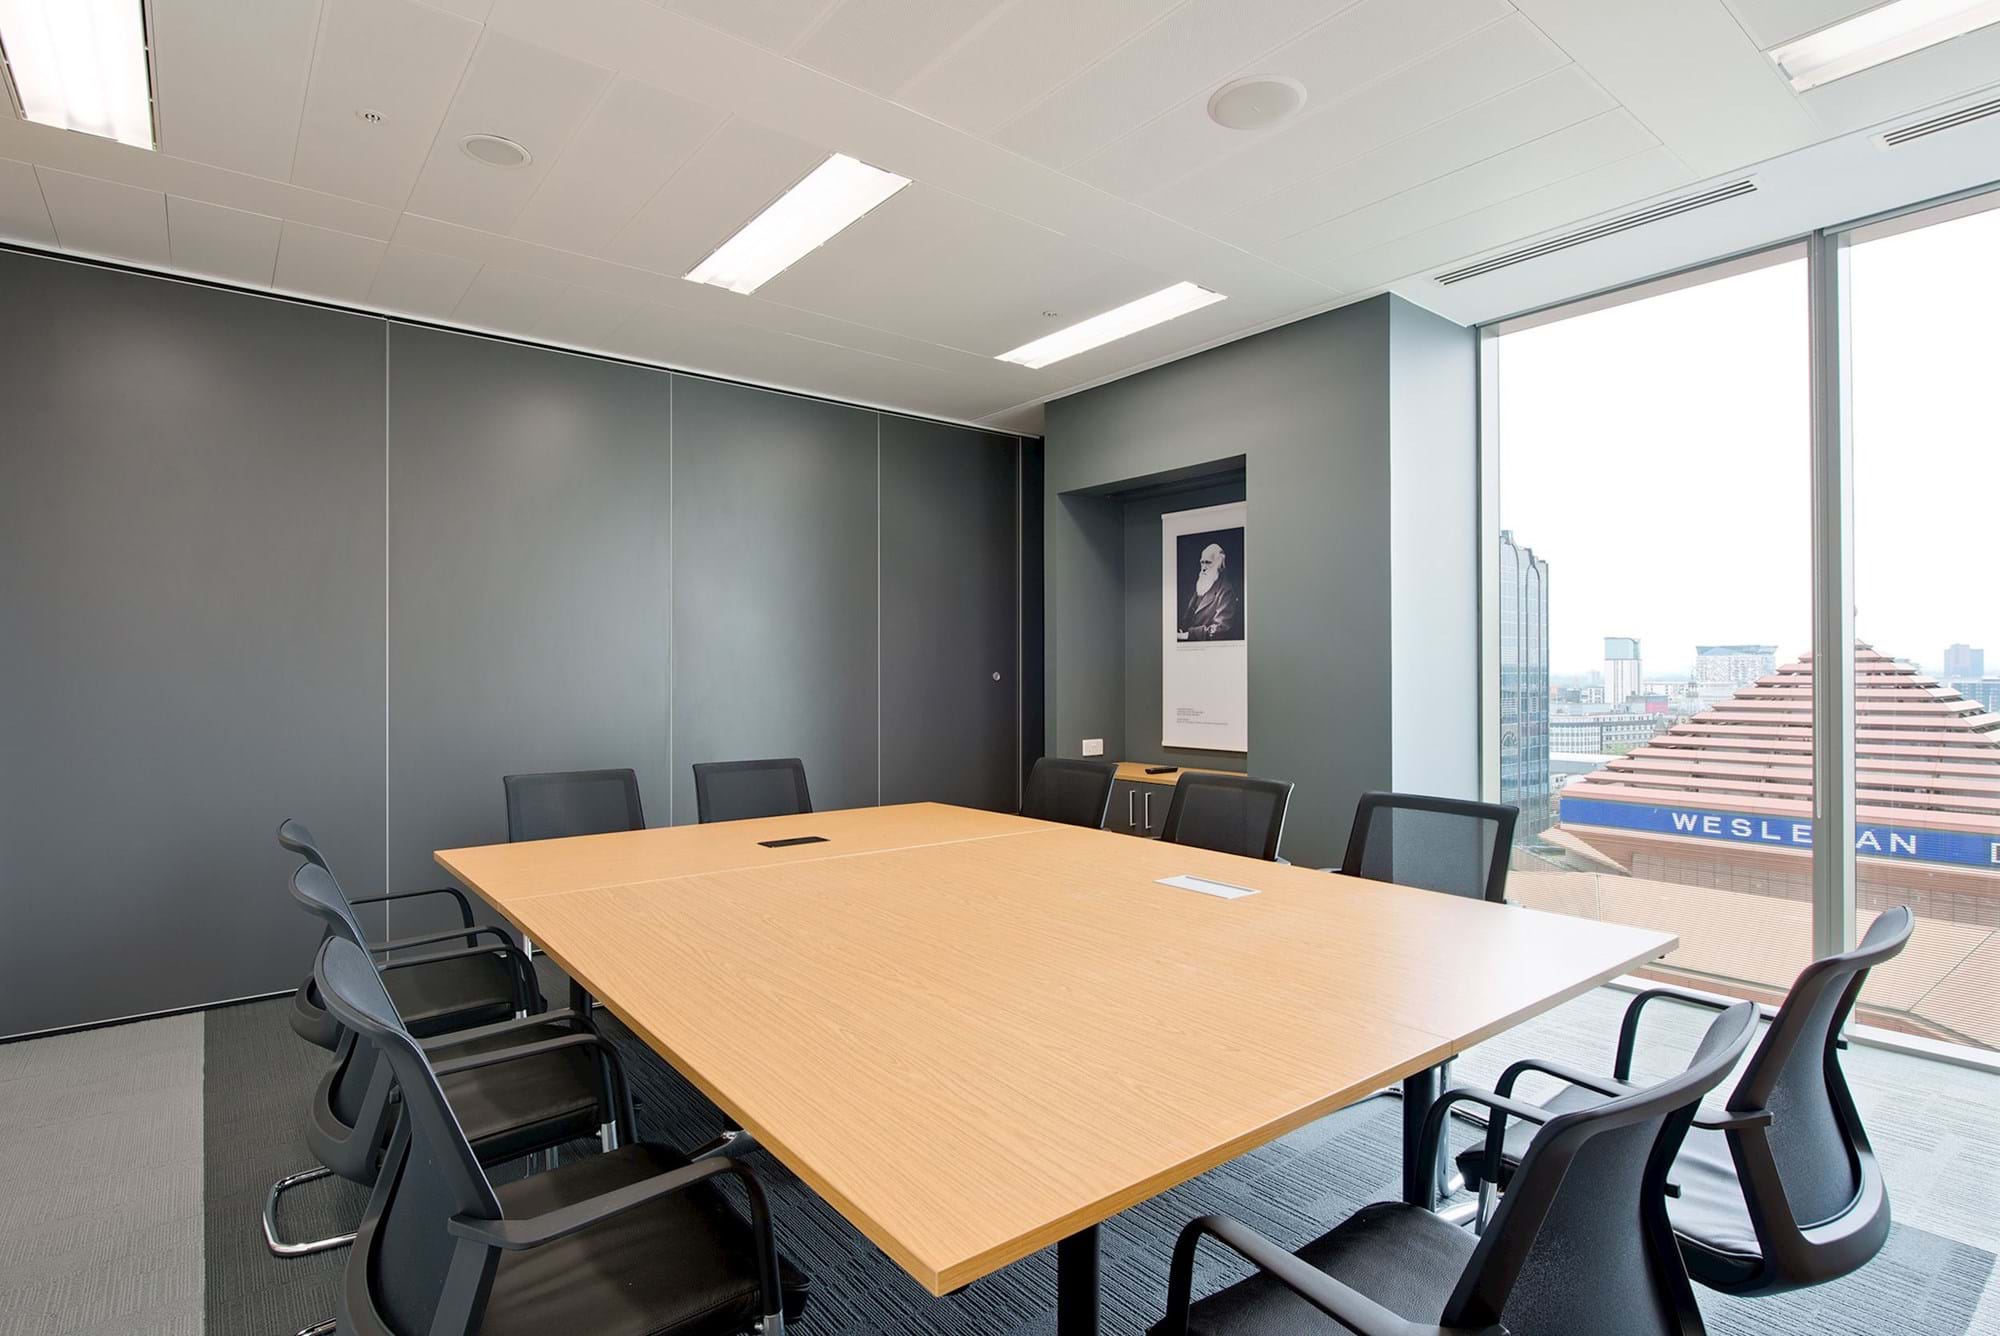 Modus Workspace office design, fit out and refurbishment - Financial Business - Meeting Room - Marsh 06 highres sRGB.jpg